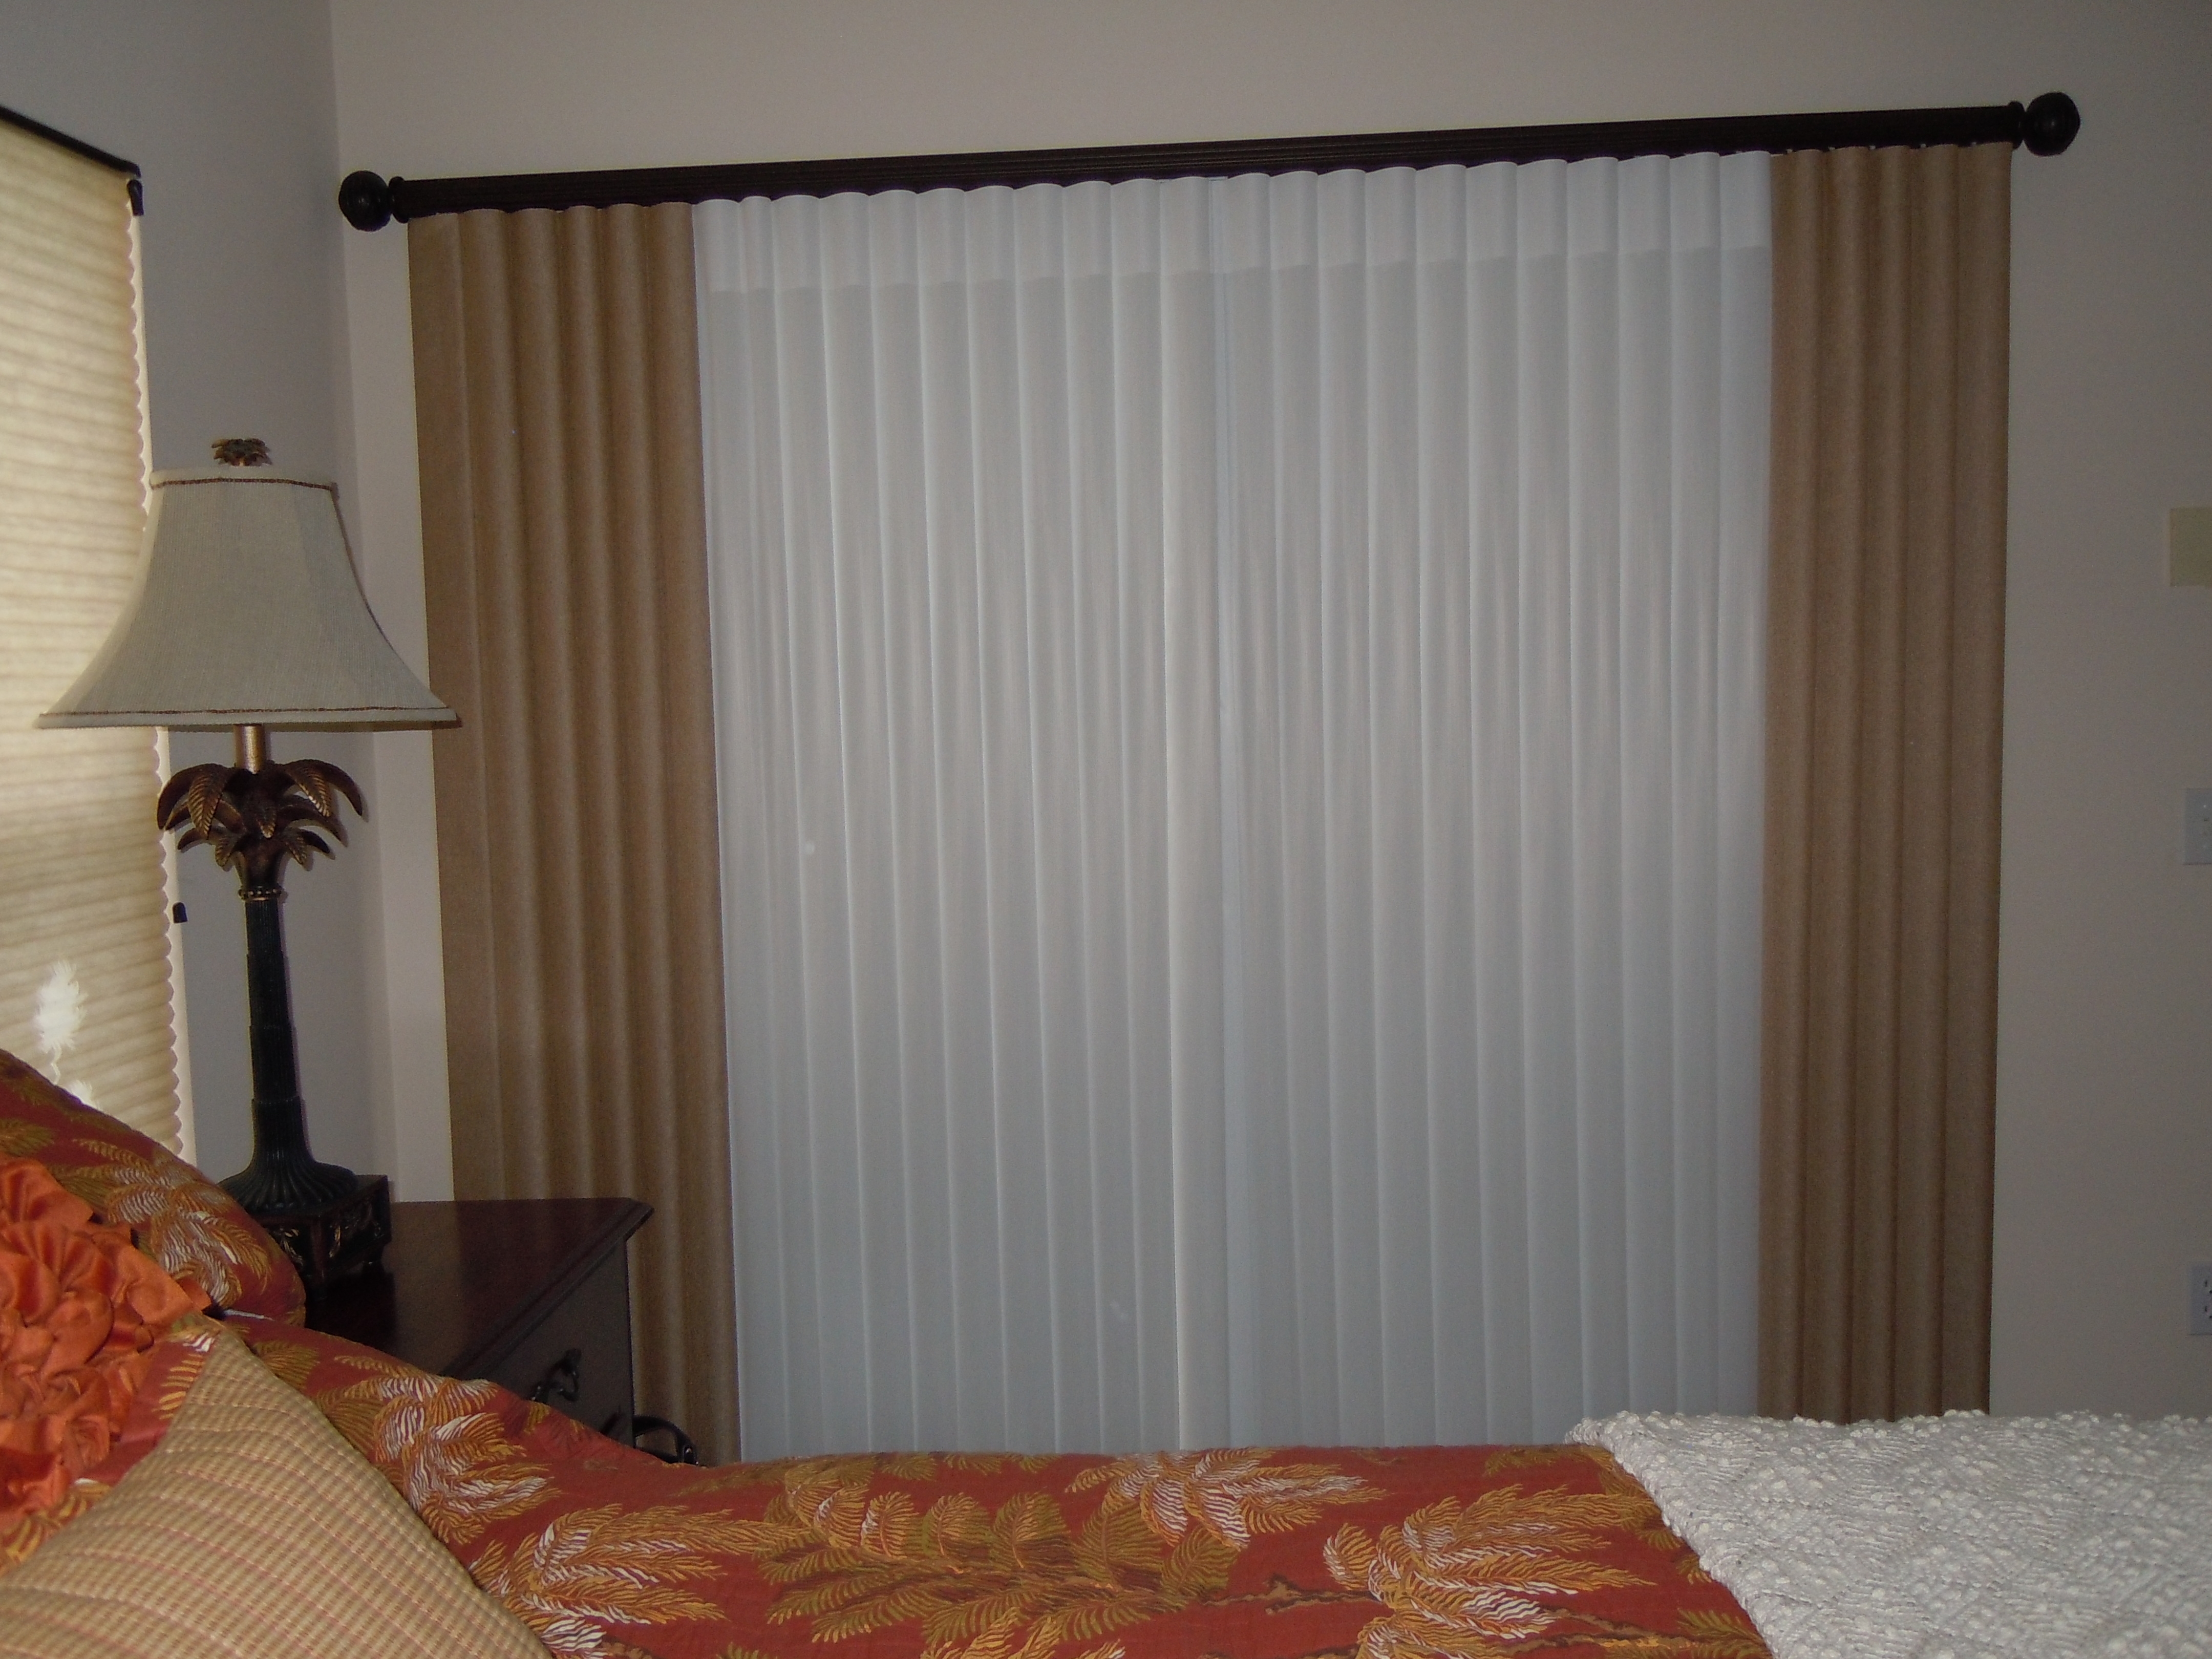 Curtain Rods For Sliding Glass Doors With Vertical Blinds Sliding Doors